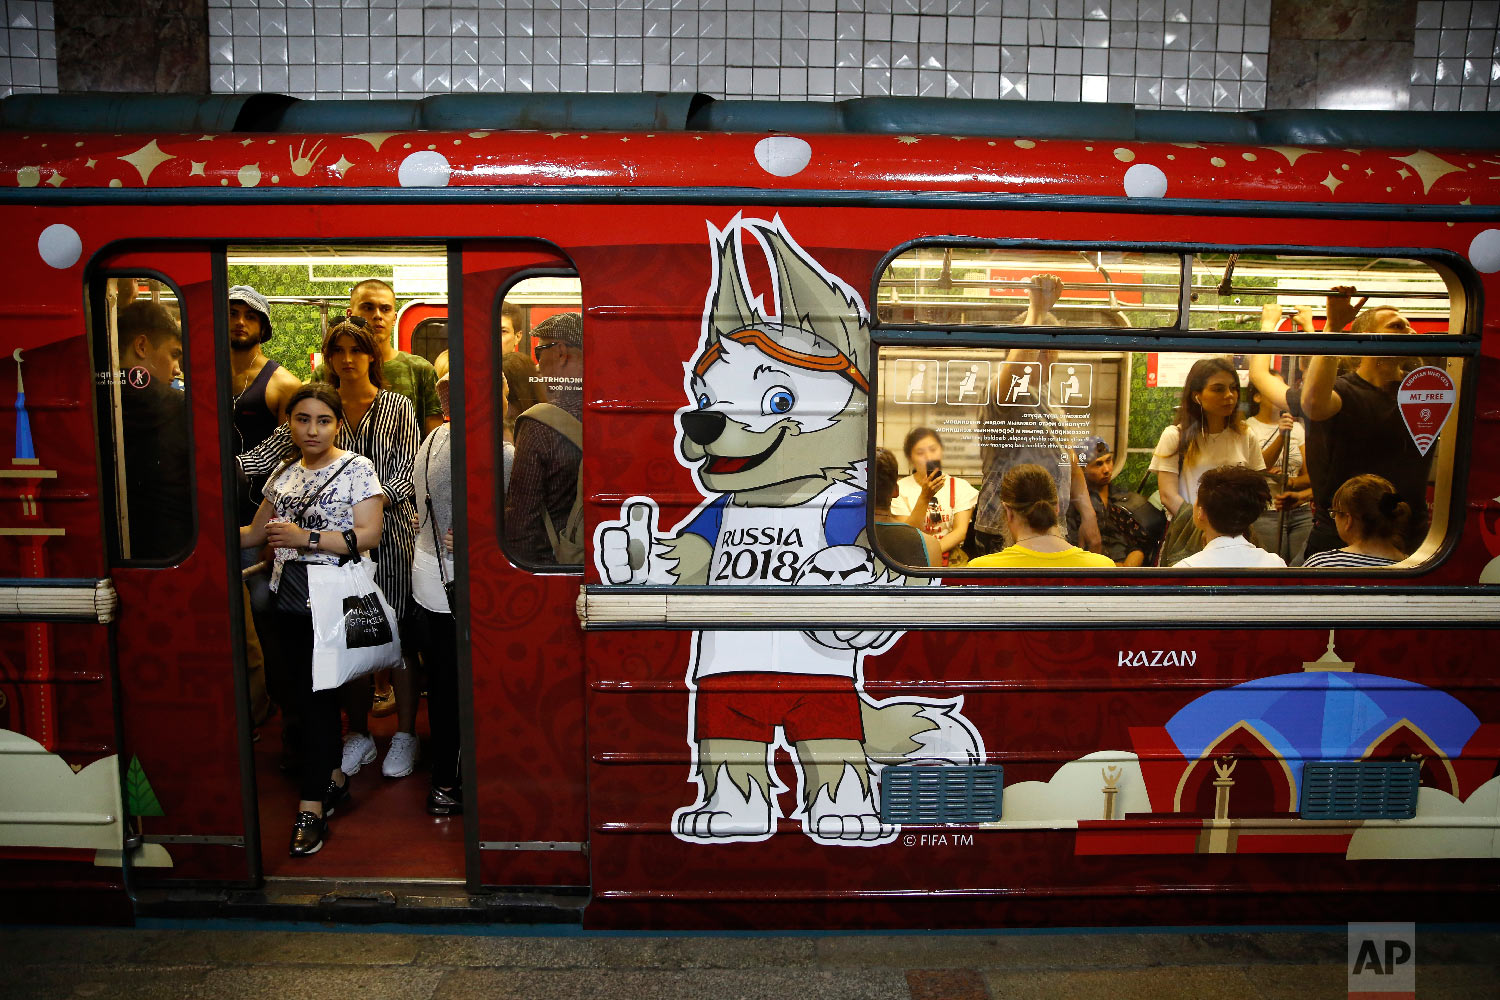  Commuters ride home on a subway car decorated for the 2018 soccer World Cup, in Moscow, Russia on June 30, 2018. (AP Photo/Rebecca Blackwell) 